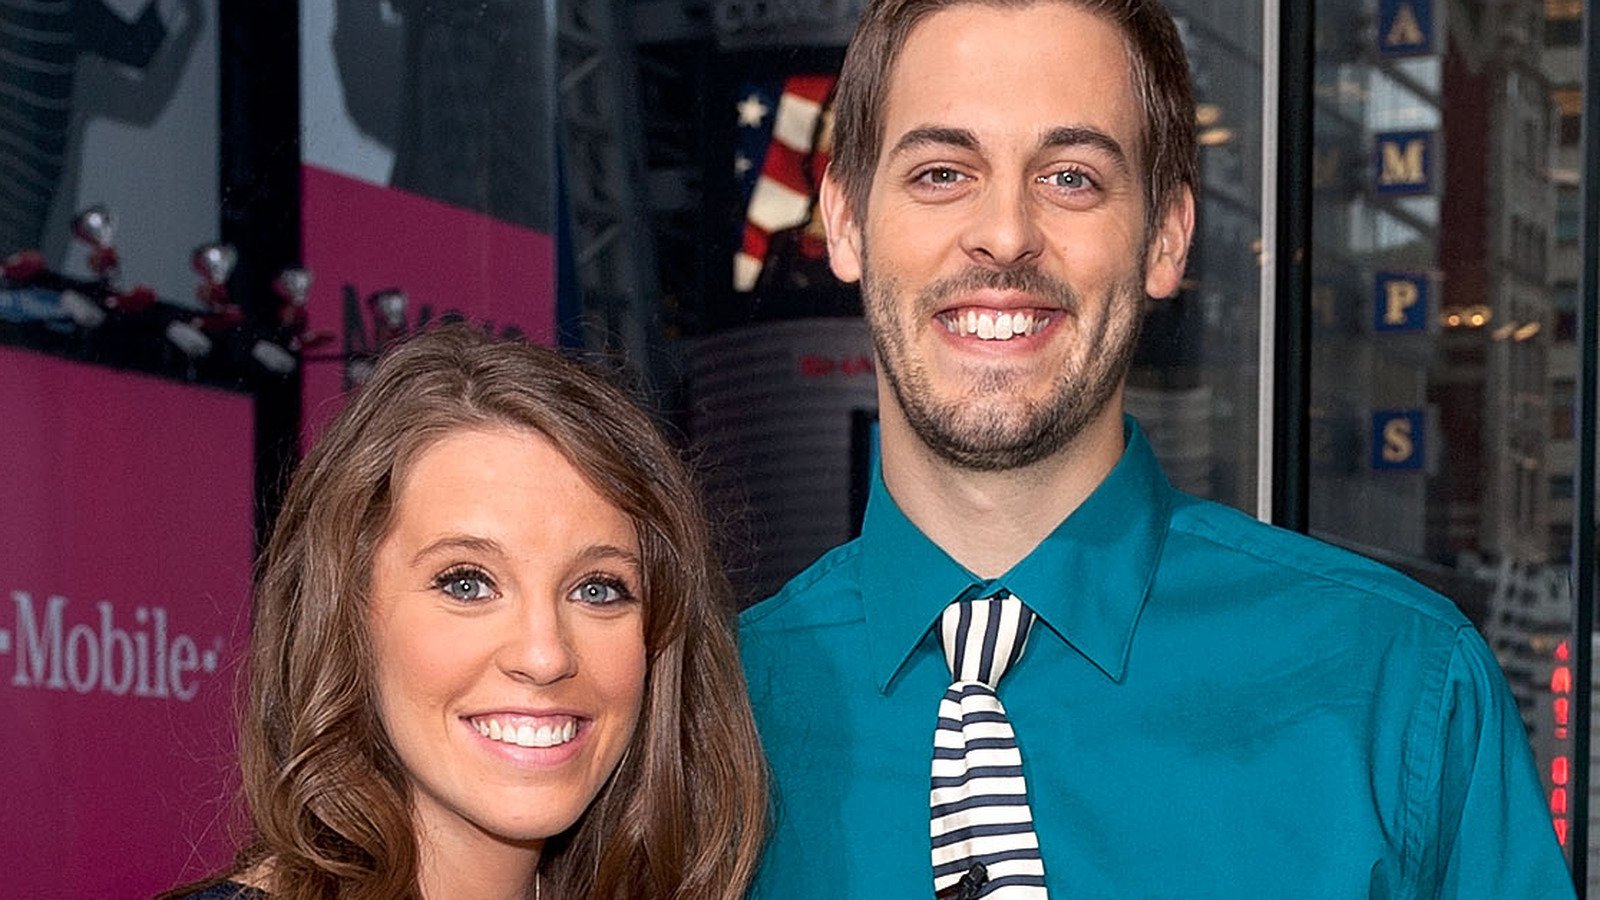 The Real Reason Jill Duggar And Derick Dillard Left Counting On - The List